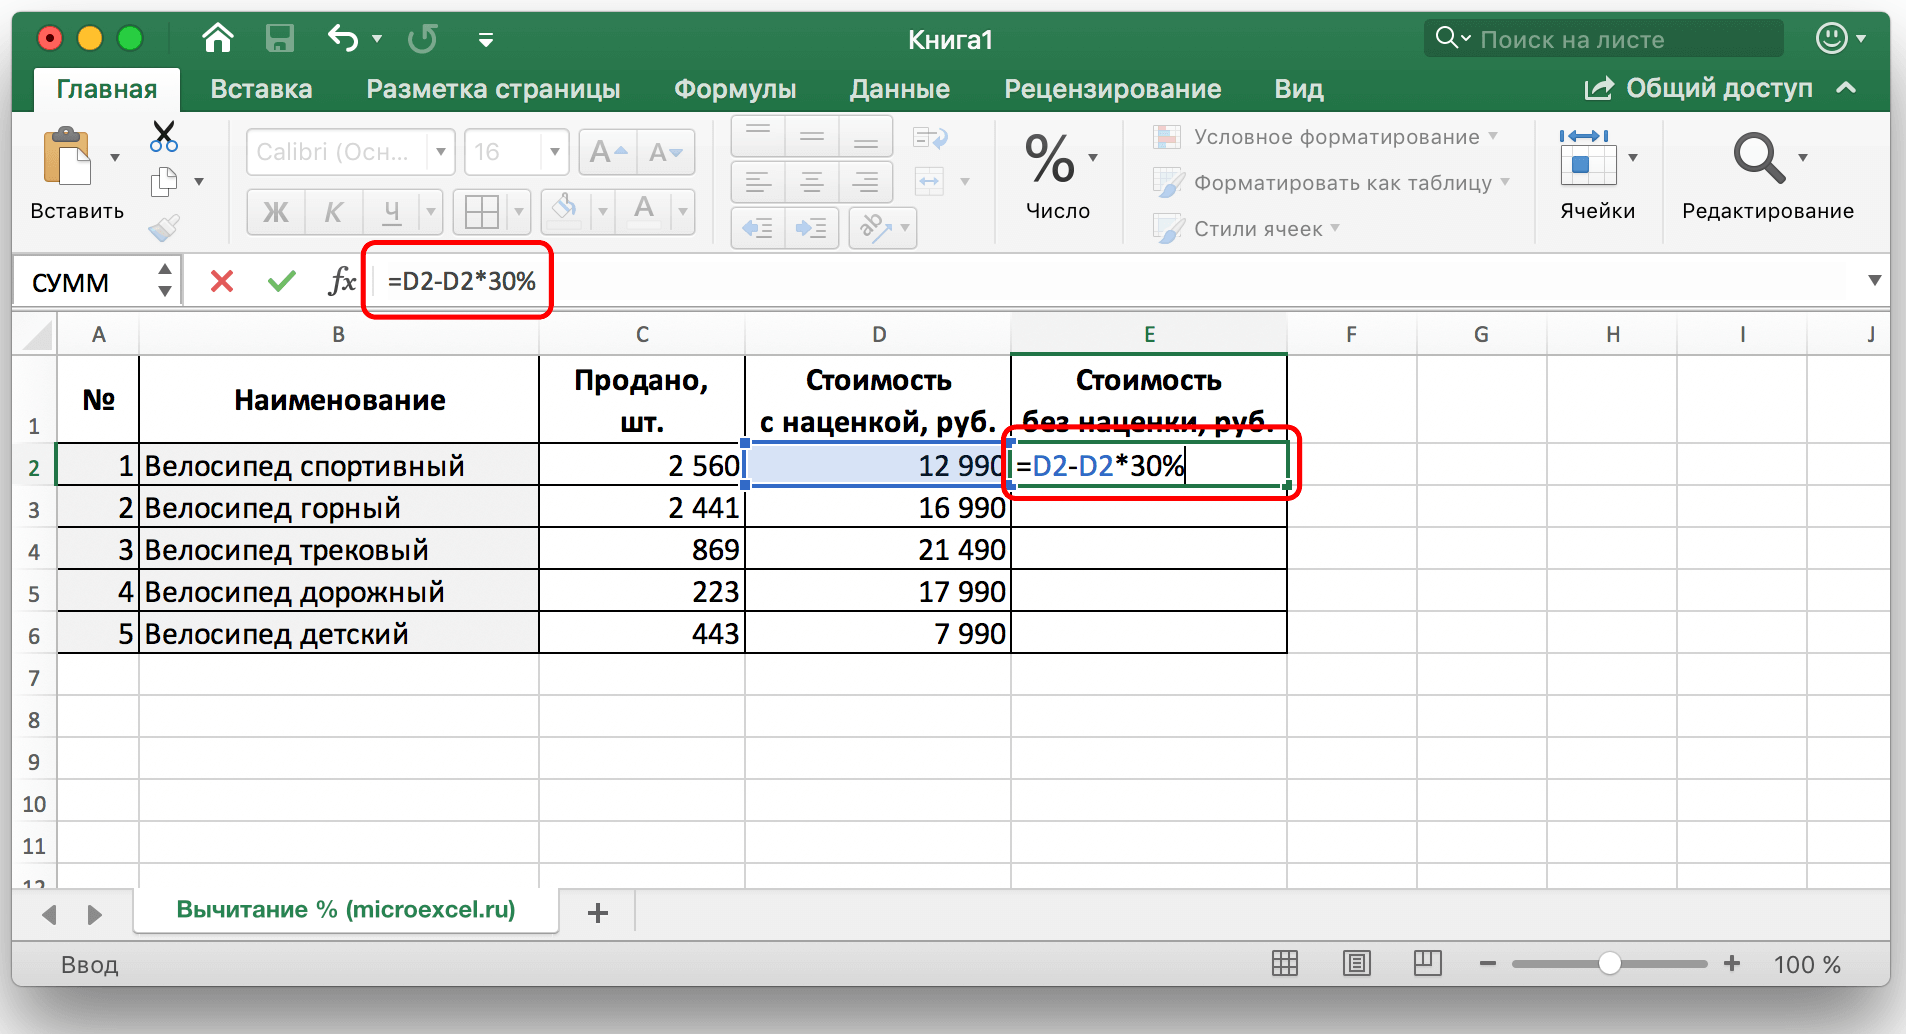 subtracting percentages in excel from whole column